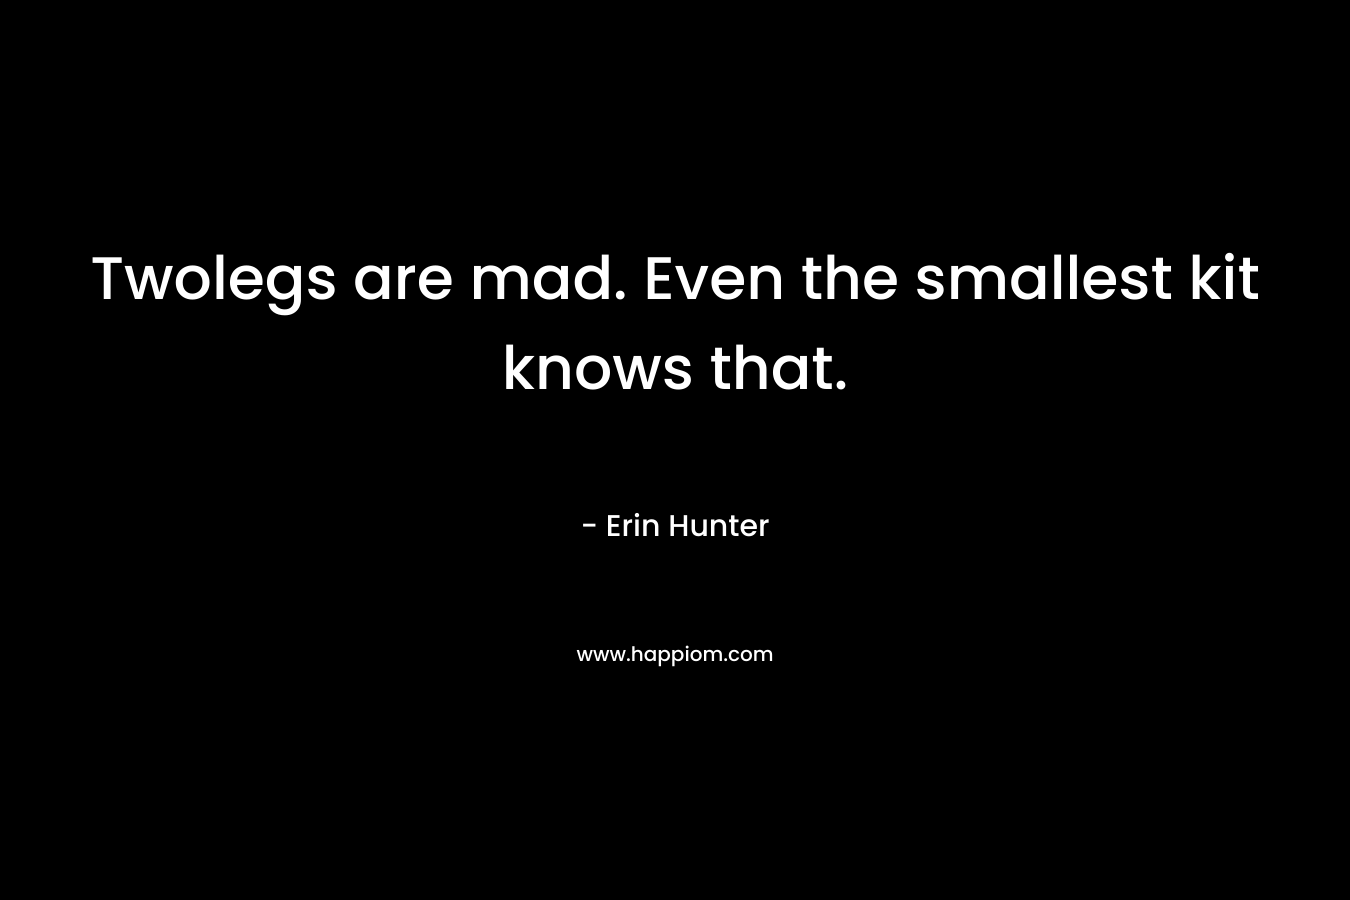 Twolegs are mad. Even the smallest kit knows that. – Erin Hunter